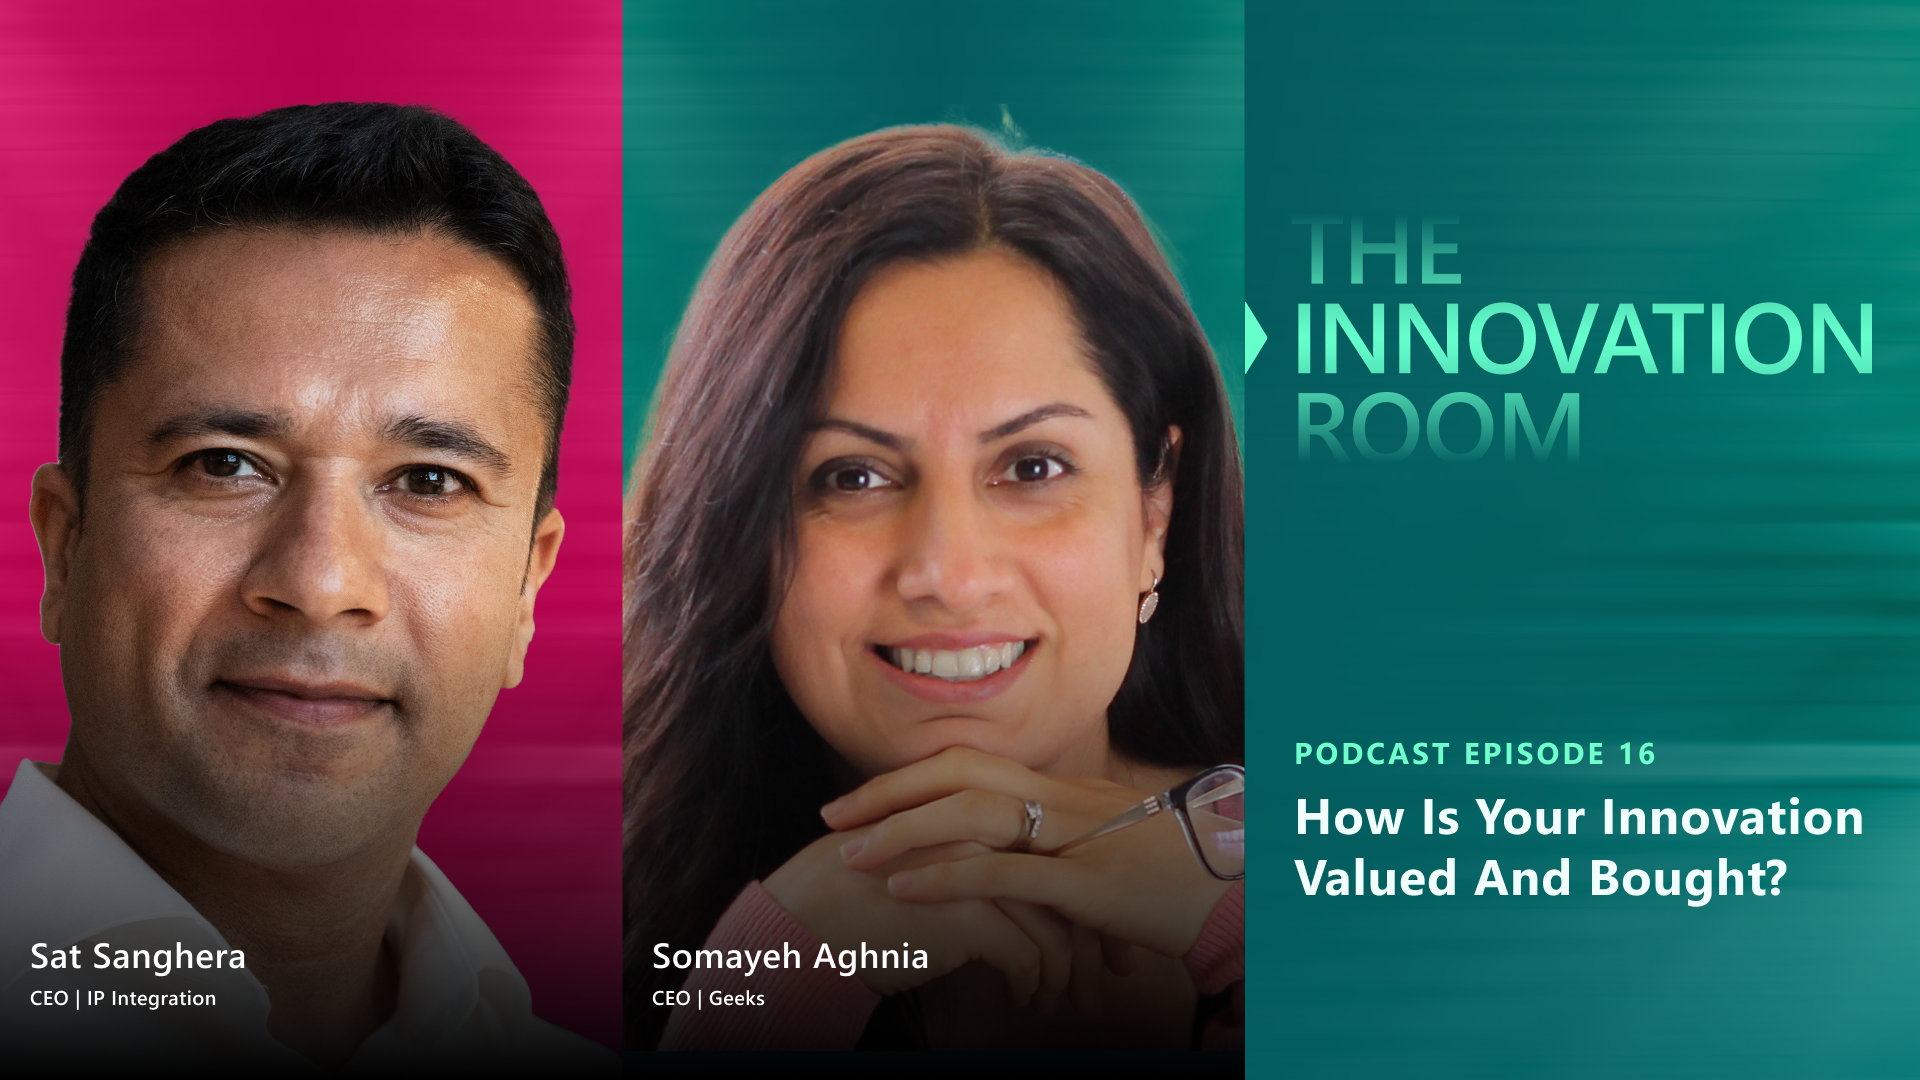 Episode 16: How Is Your Innovation Valued And Bought?